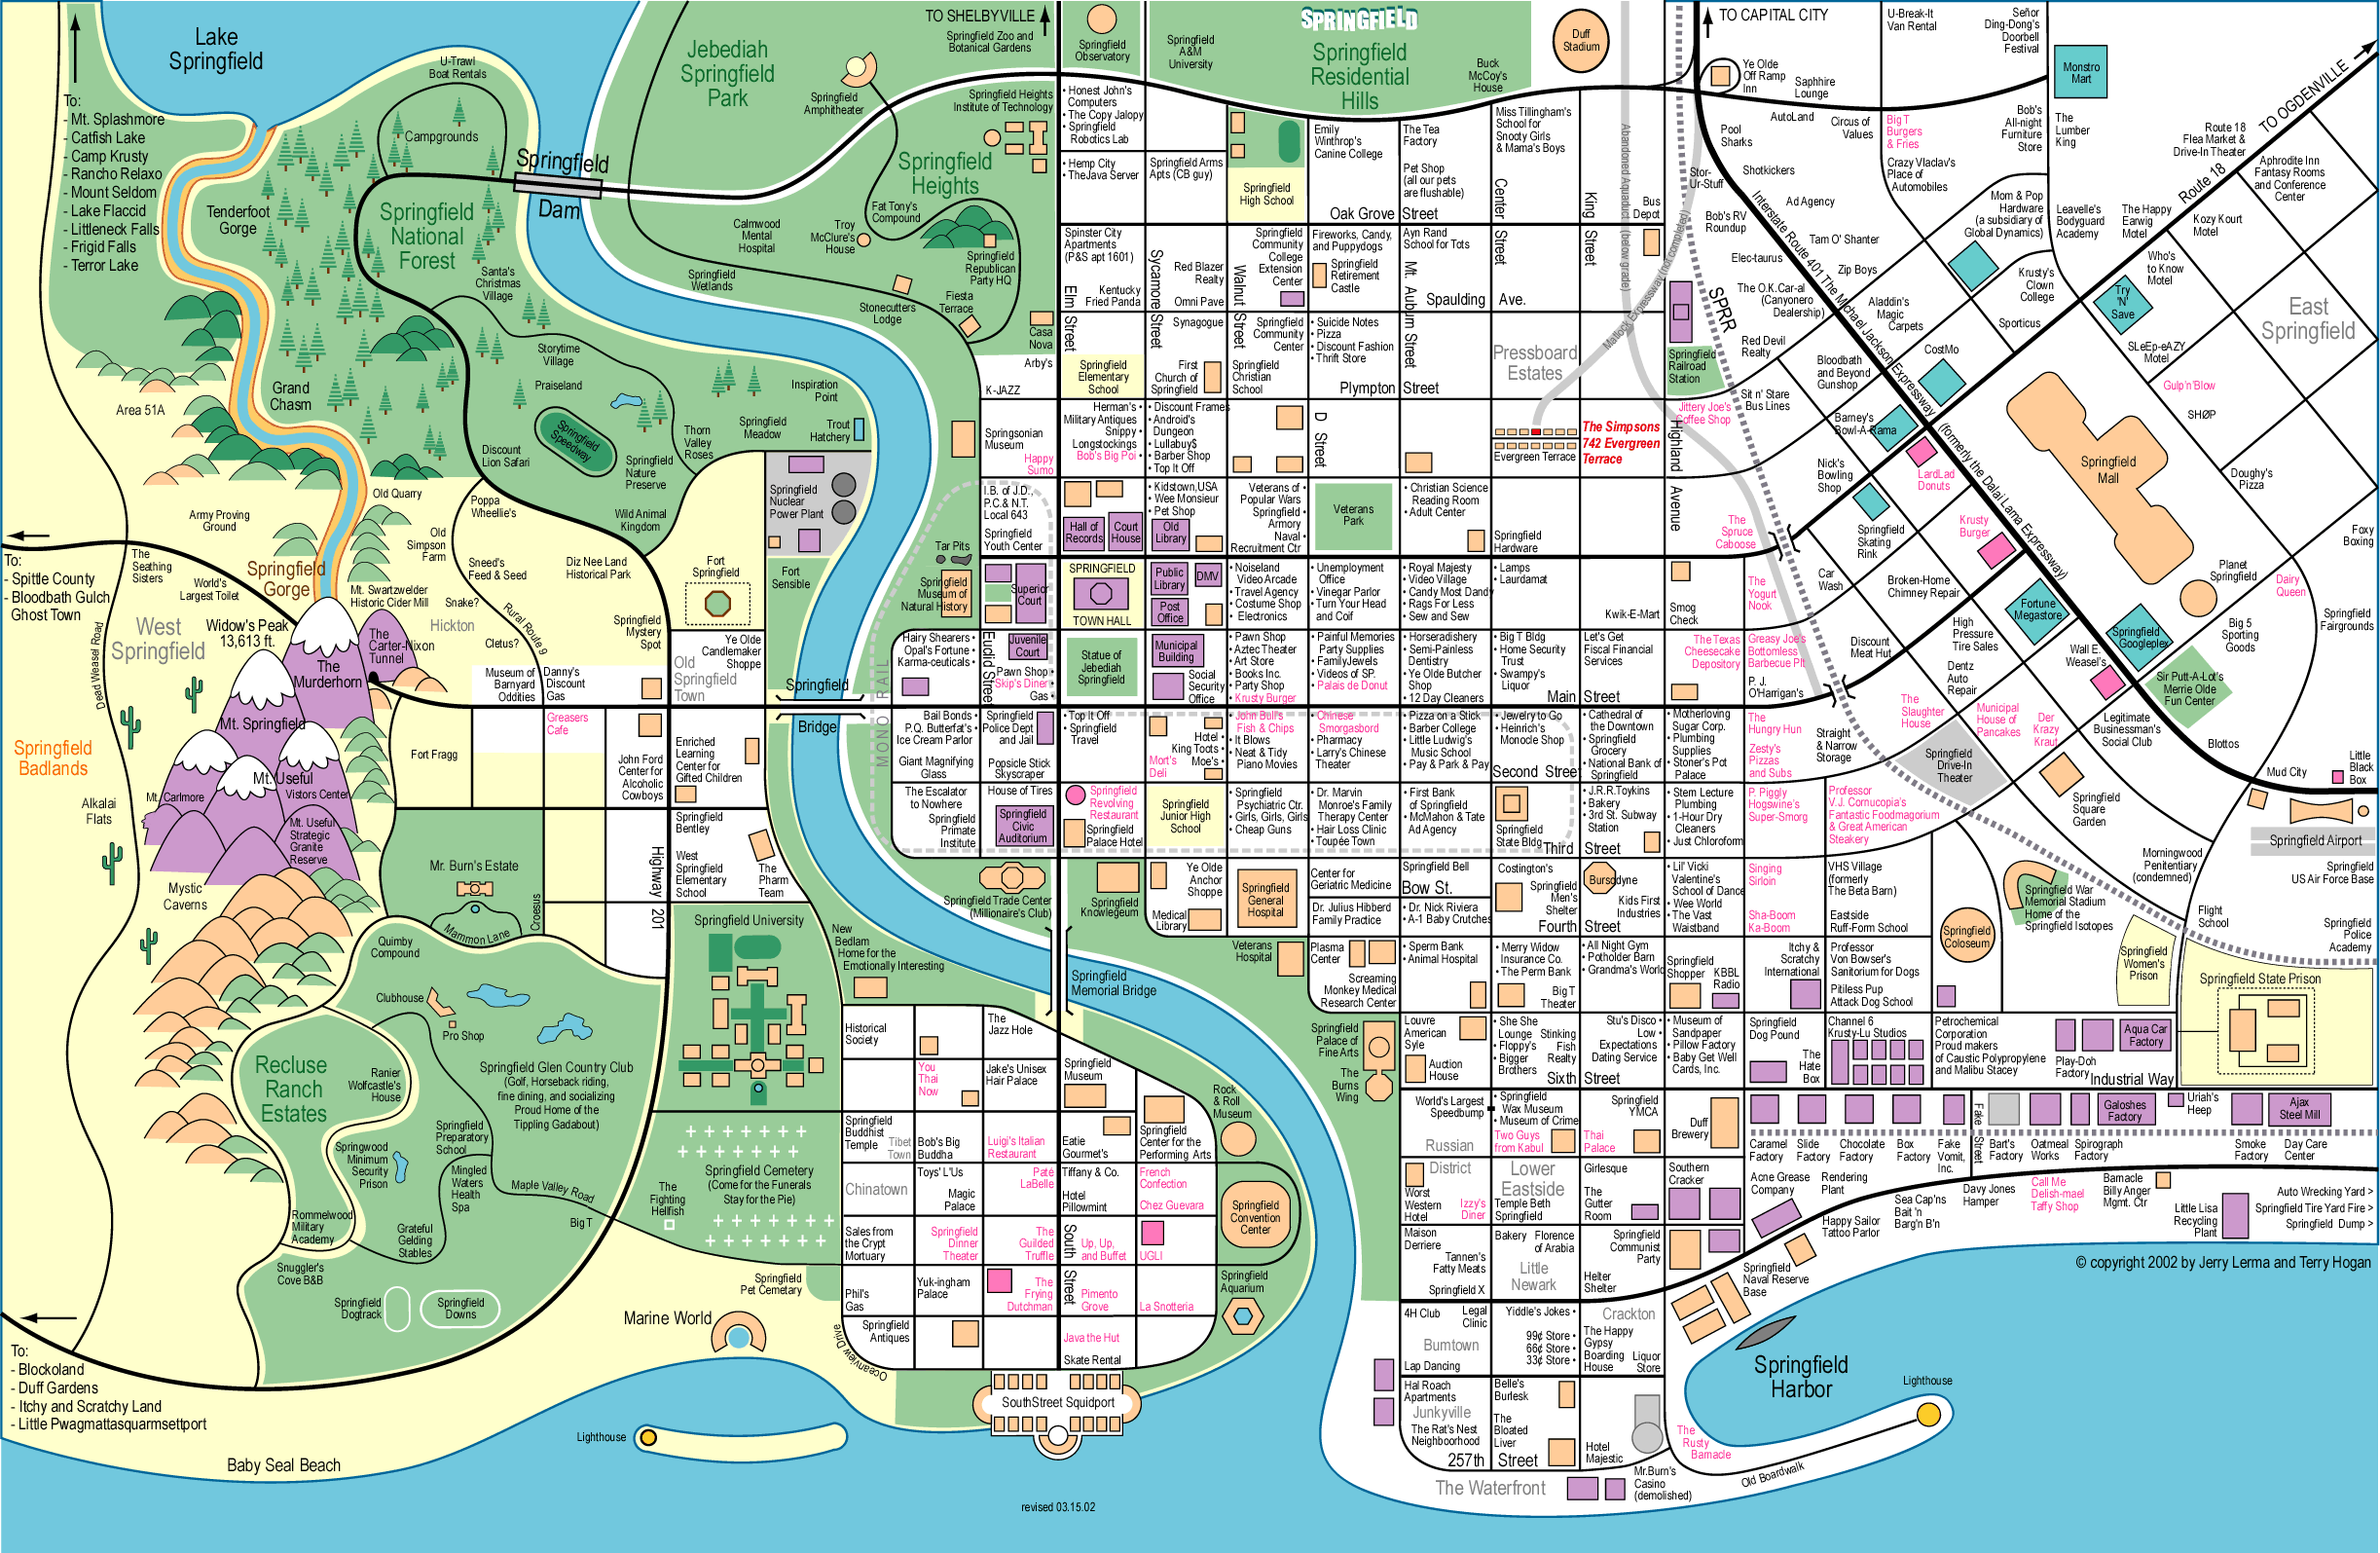 For a map of springfield